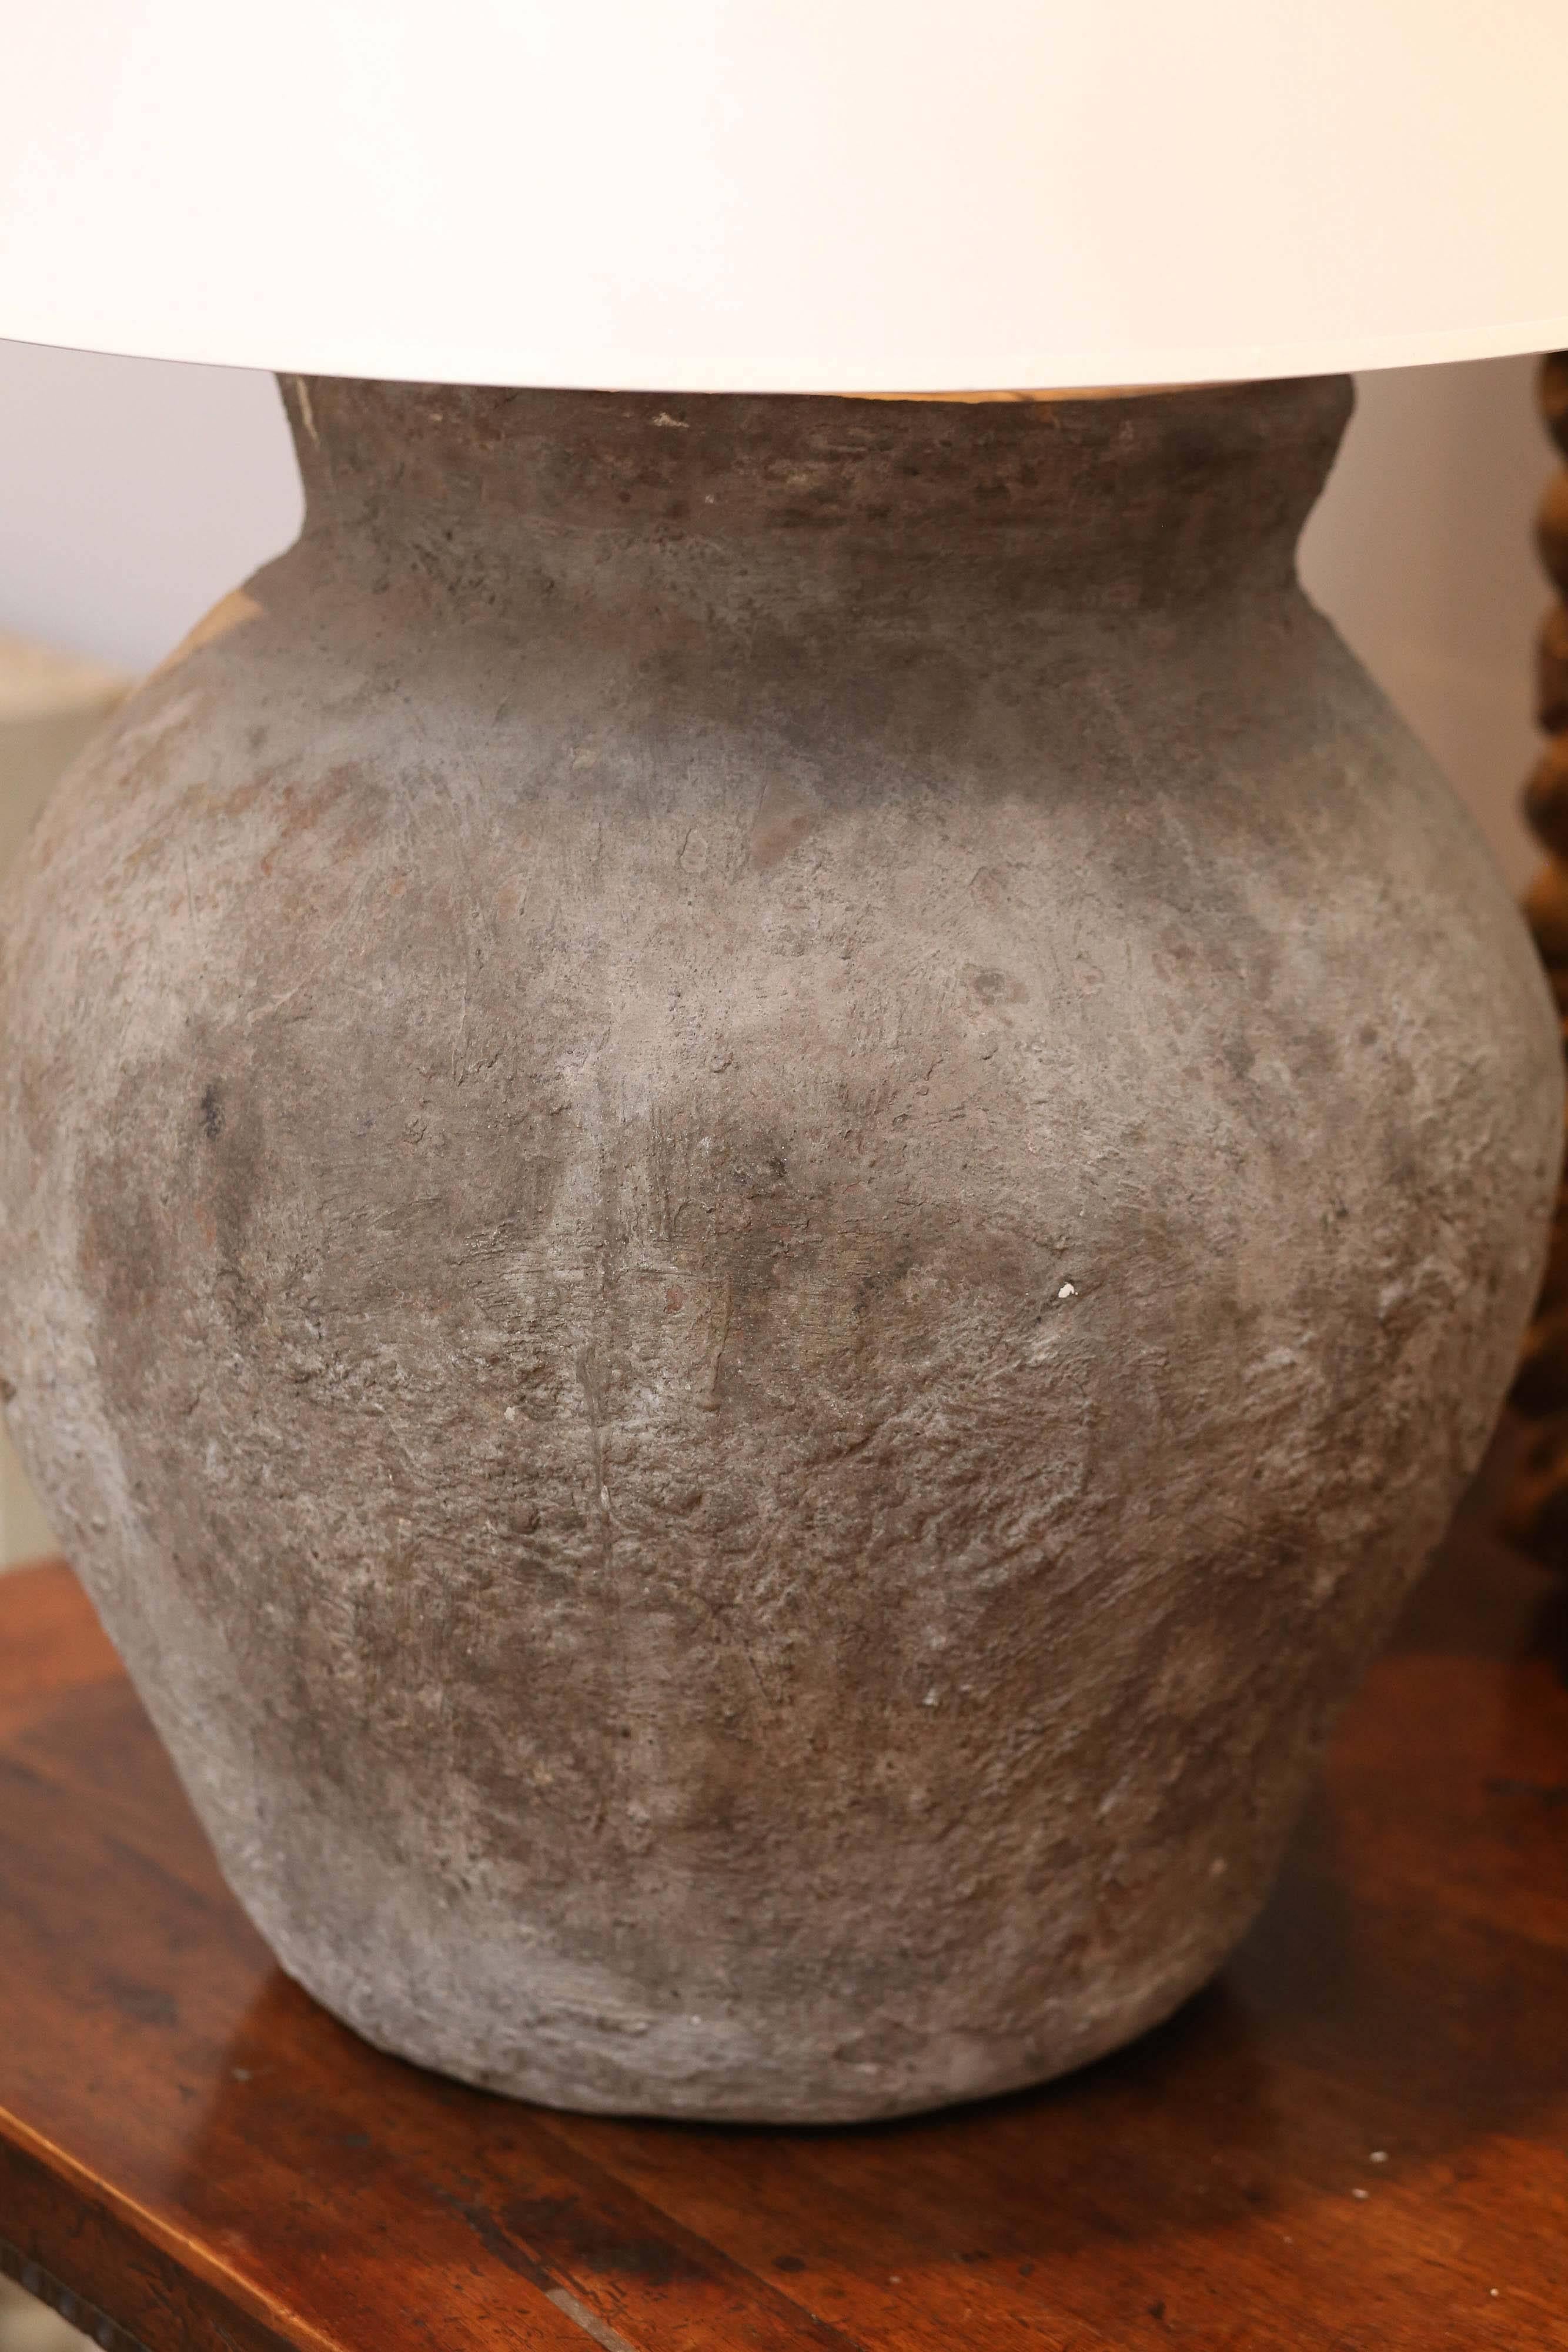 This Asian vessel jar has a great grayed lavender to the terra cotta. It has been newly made into a lamp and requires an 18